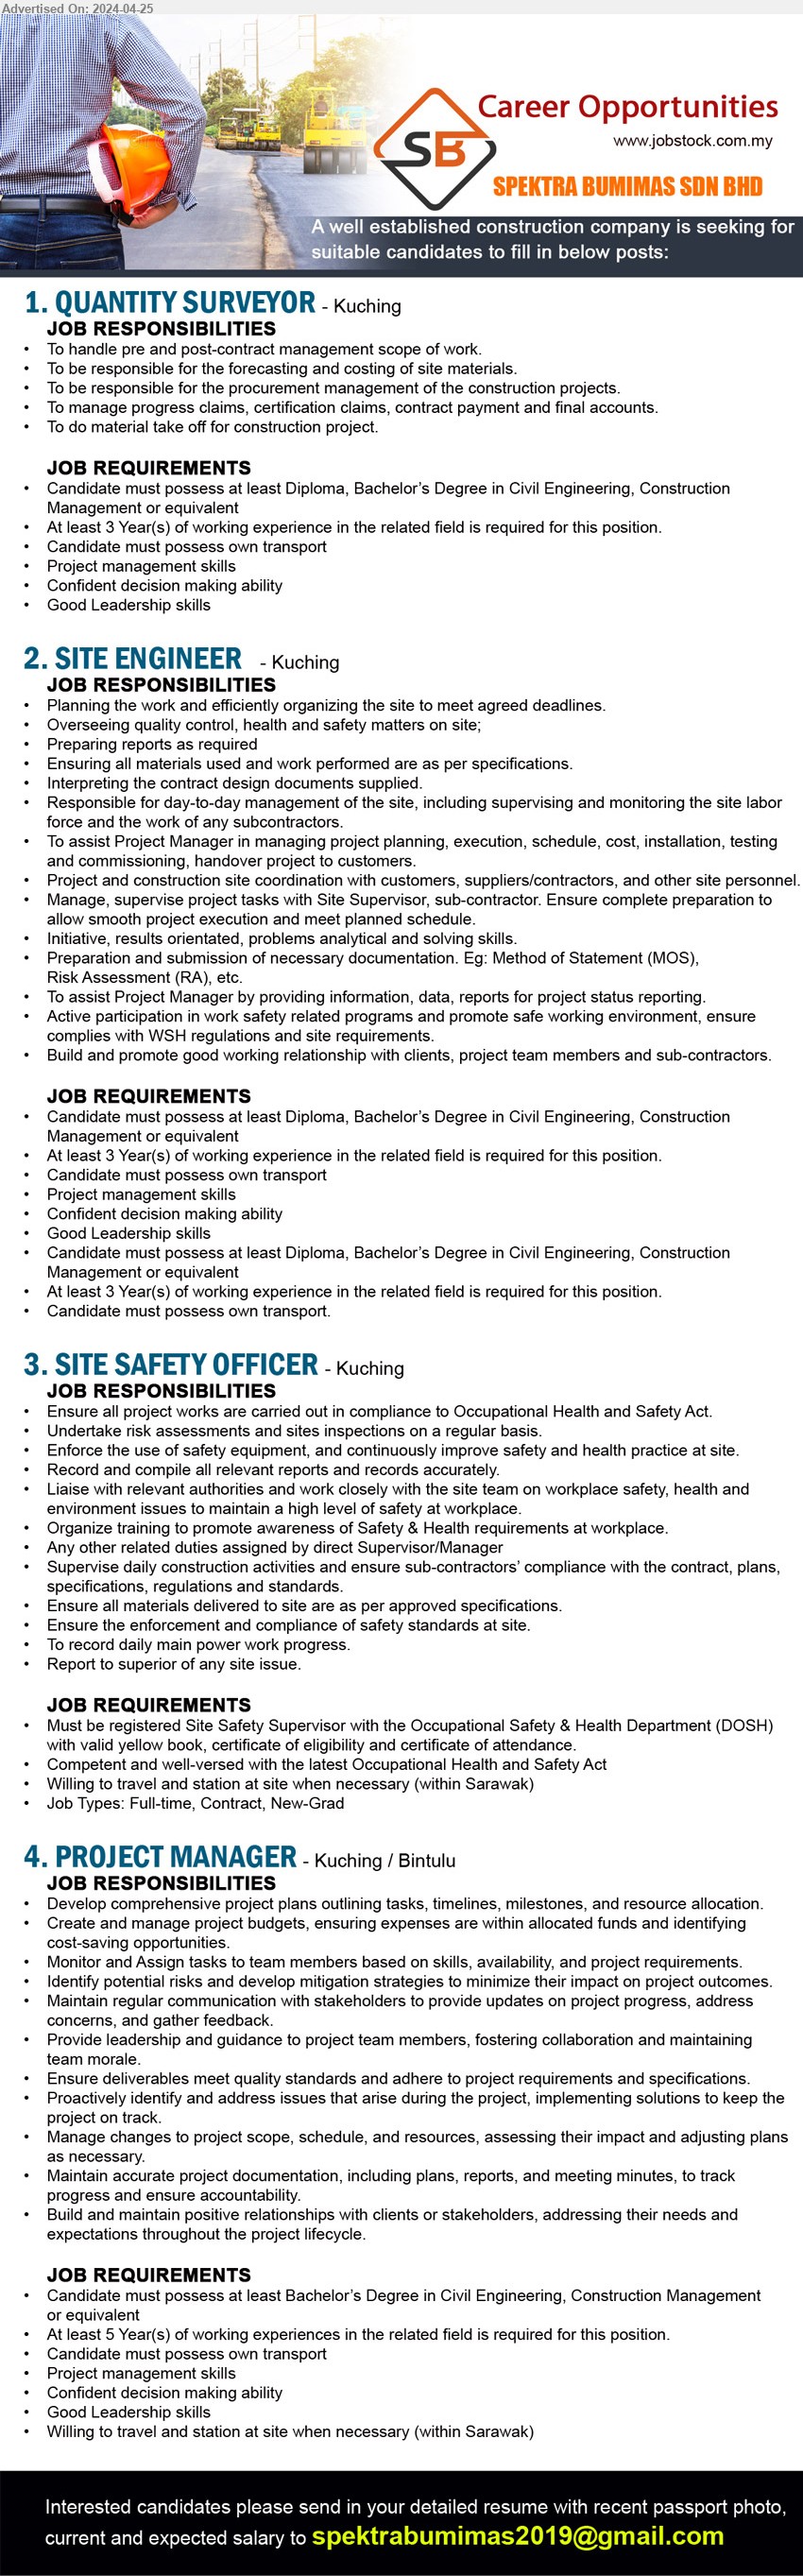 SPEKTRA BUMIMAS SDN BHD - 1. QUANTITY SURVEYOR (Kuching), Diploma, Bachelor’s Degree in Civil Engineering, Construction Management,...
2. SITE ENGINEER (Kuching), Diploma, Bachelor’s Degree in Civil Engineering, Construction Management,...
3. SITE SAFETY OFFICER (Kuching), Must be registered Site Safety Supervisor with the Occupational Safety & Health Department (DOSH) ,...
4. PROJECT MANAGER (Kuching, Bintulu), Bachelor’s Degree in Civil Engineering, Construction Management,...
Email resume to ...